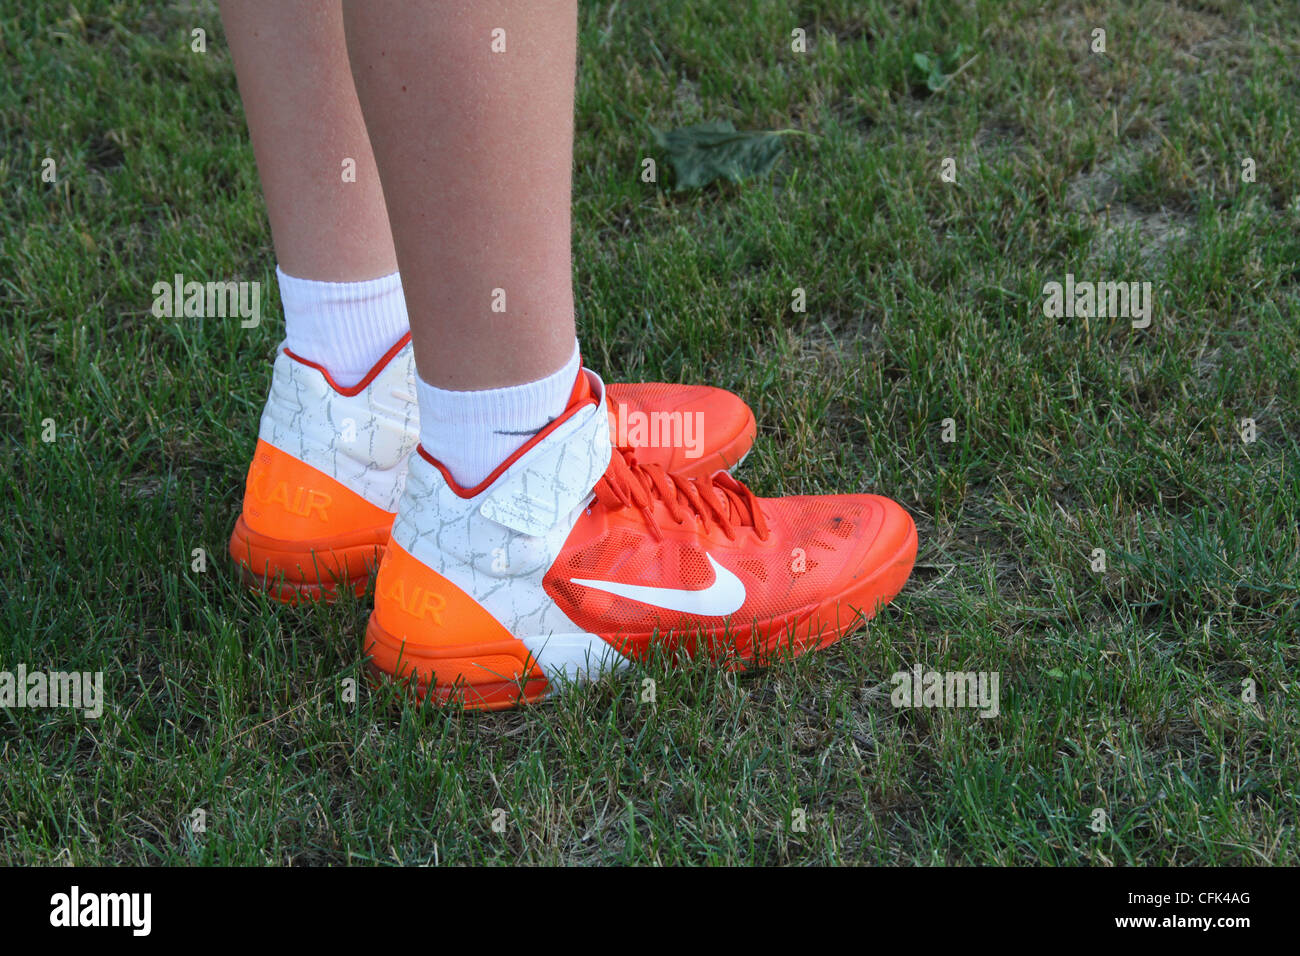 Nike sport shoes worn by teenage boy. Some dirt visible. Stock Photo